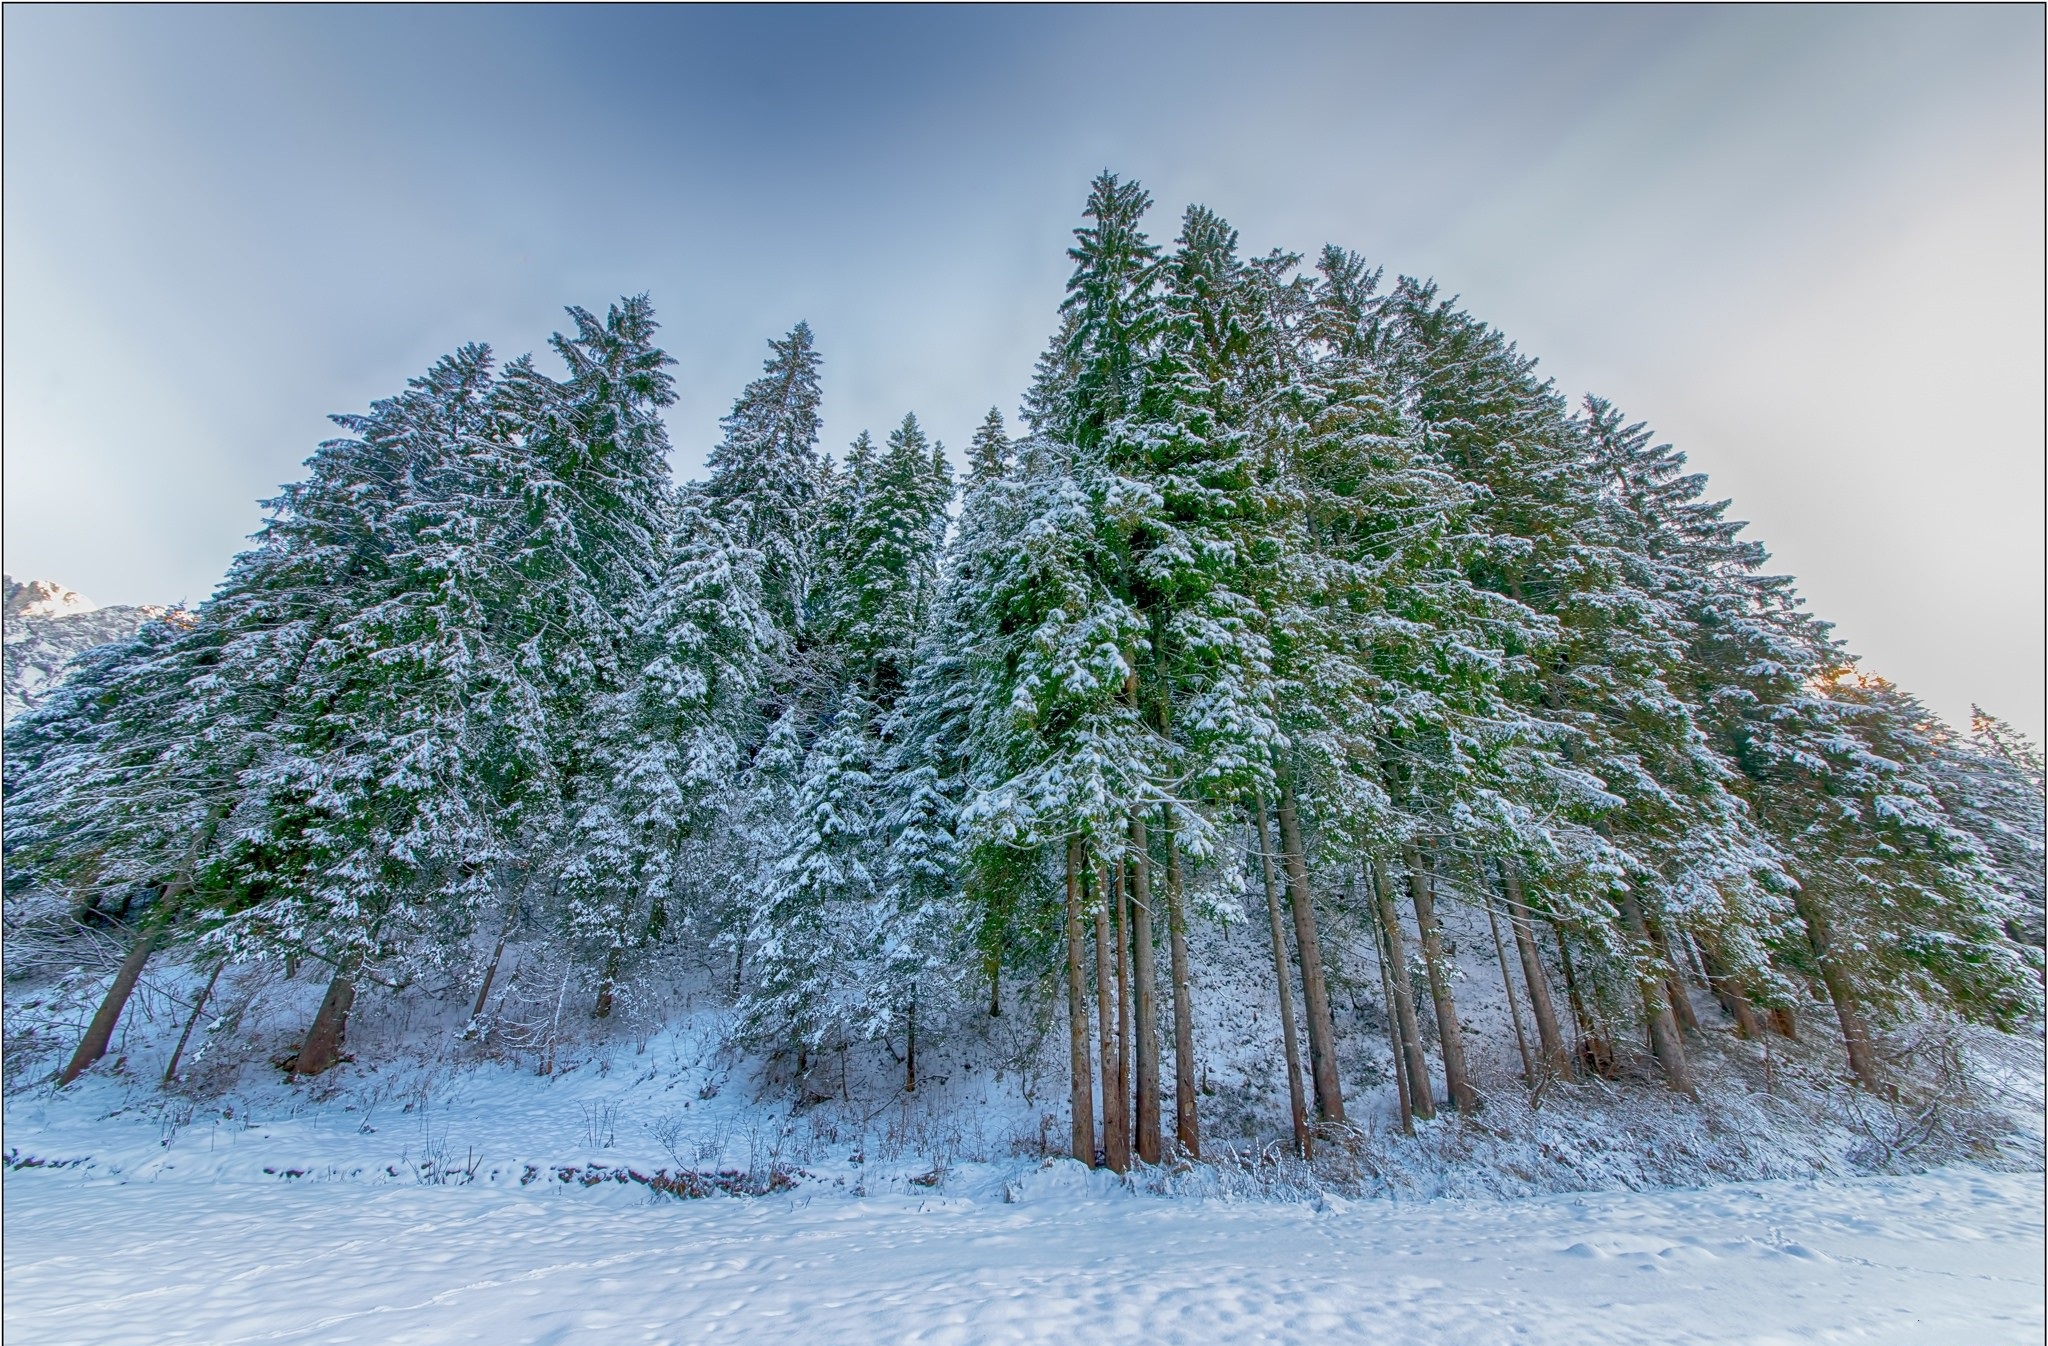 General 2048x1346 nature winter snow trees